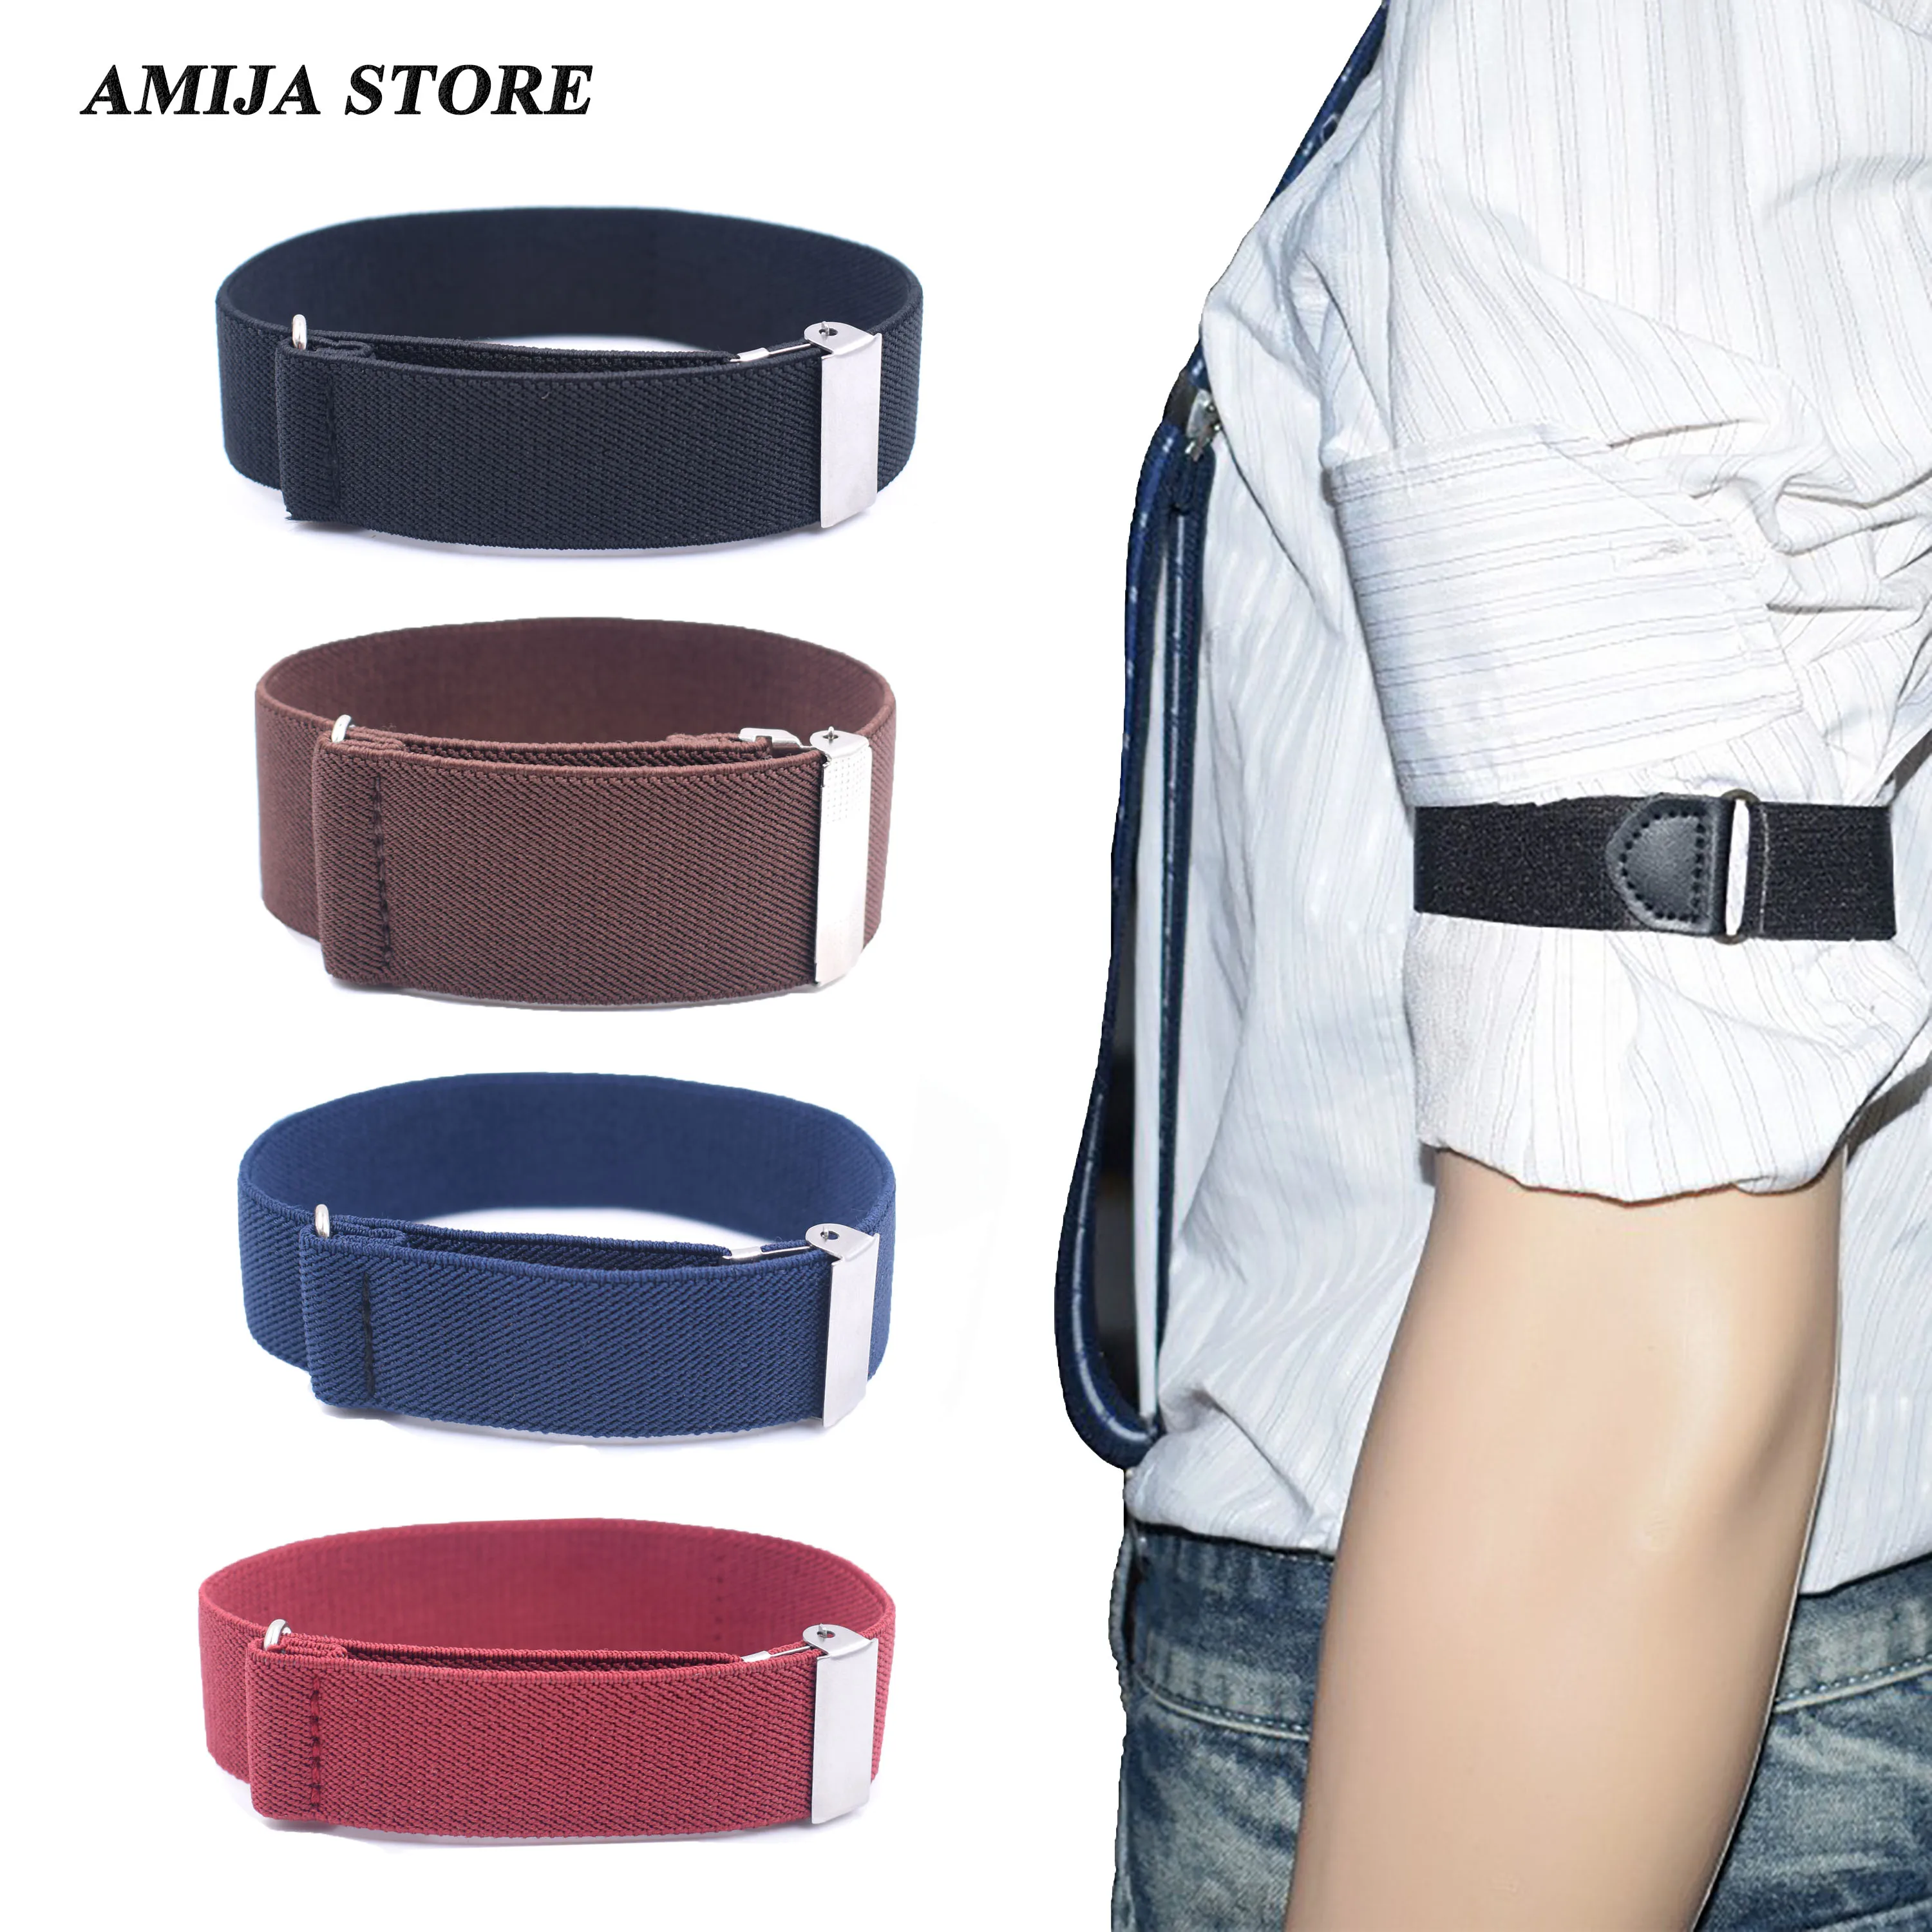 63 Styles Elastic Armband Shirt Sleeve Holder Women Men Unisex Adjustable Arm Cuffs Bands for Party Wedding Clothing Accessories